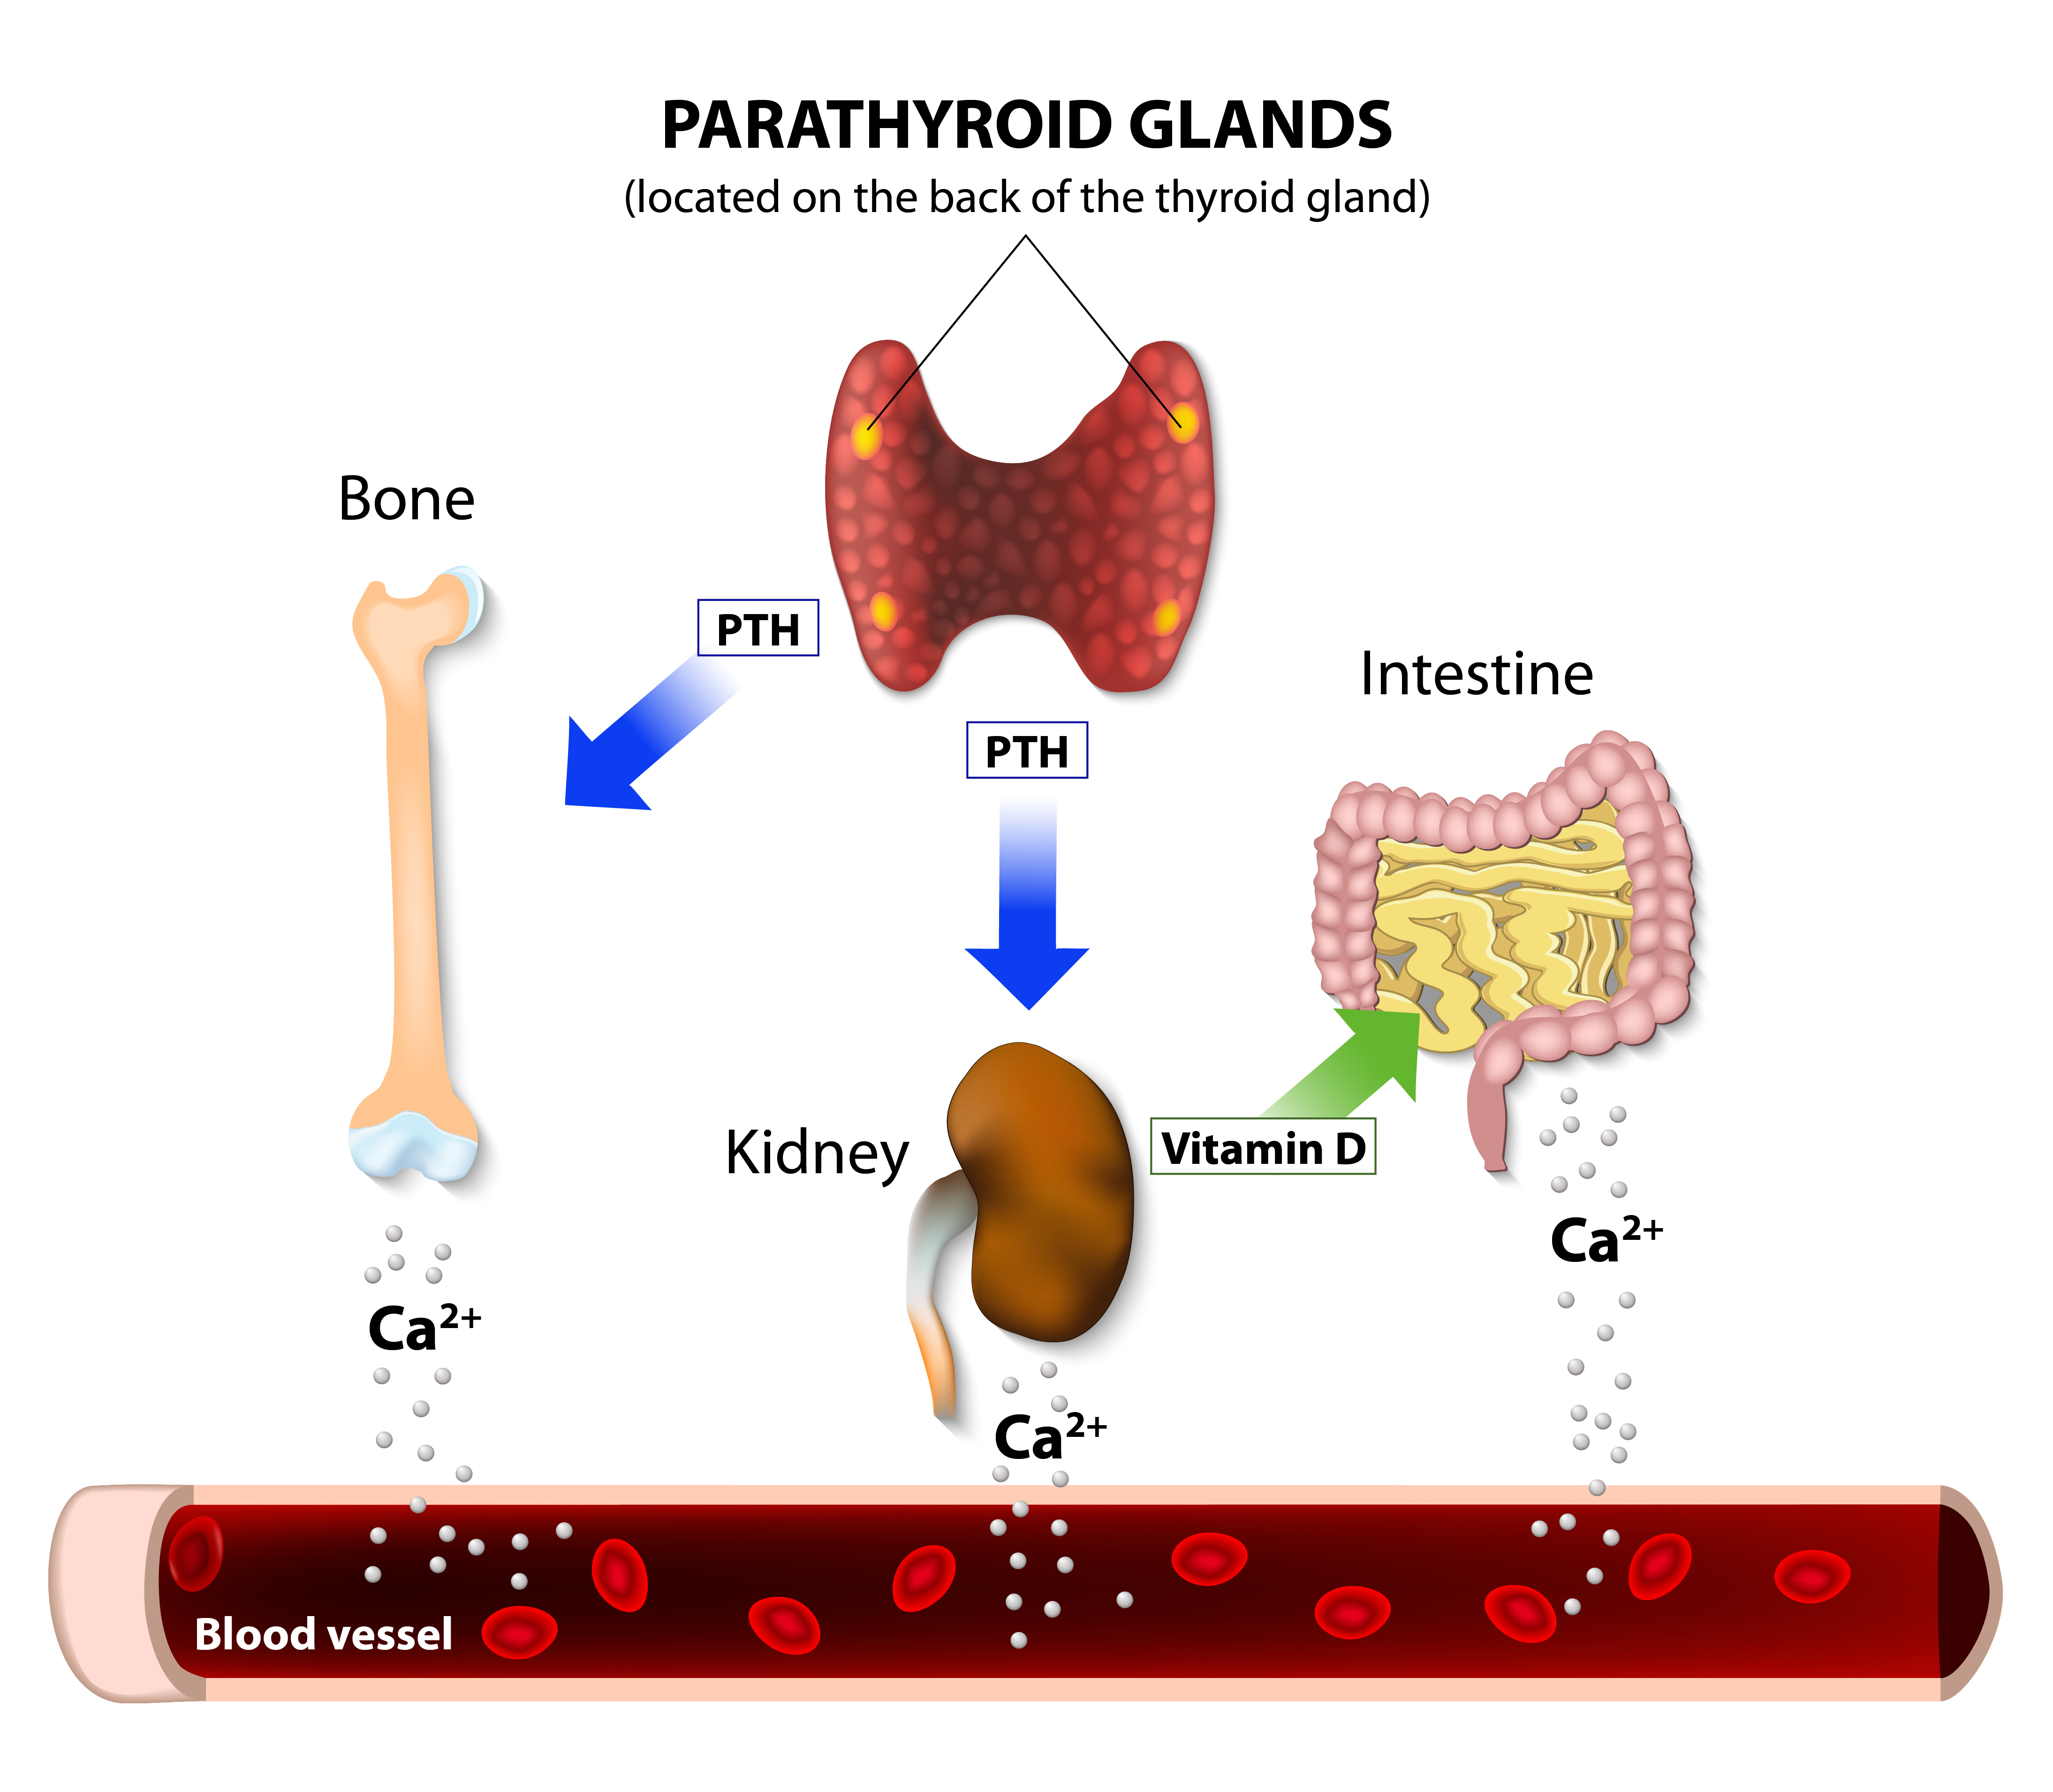 Hyperactive Parathyroid May Trouble Women with Fibromyalgia, Study